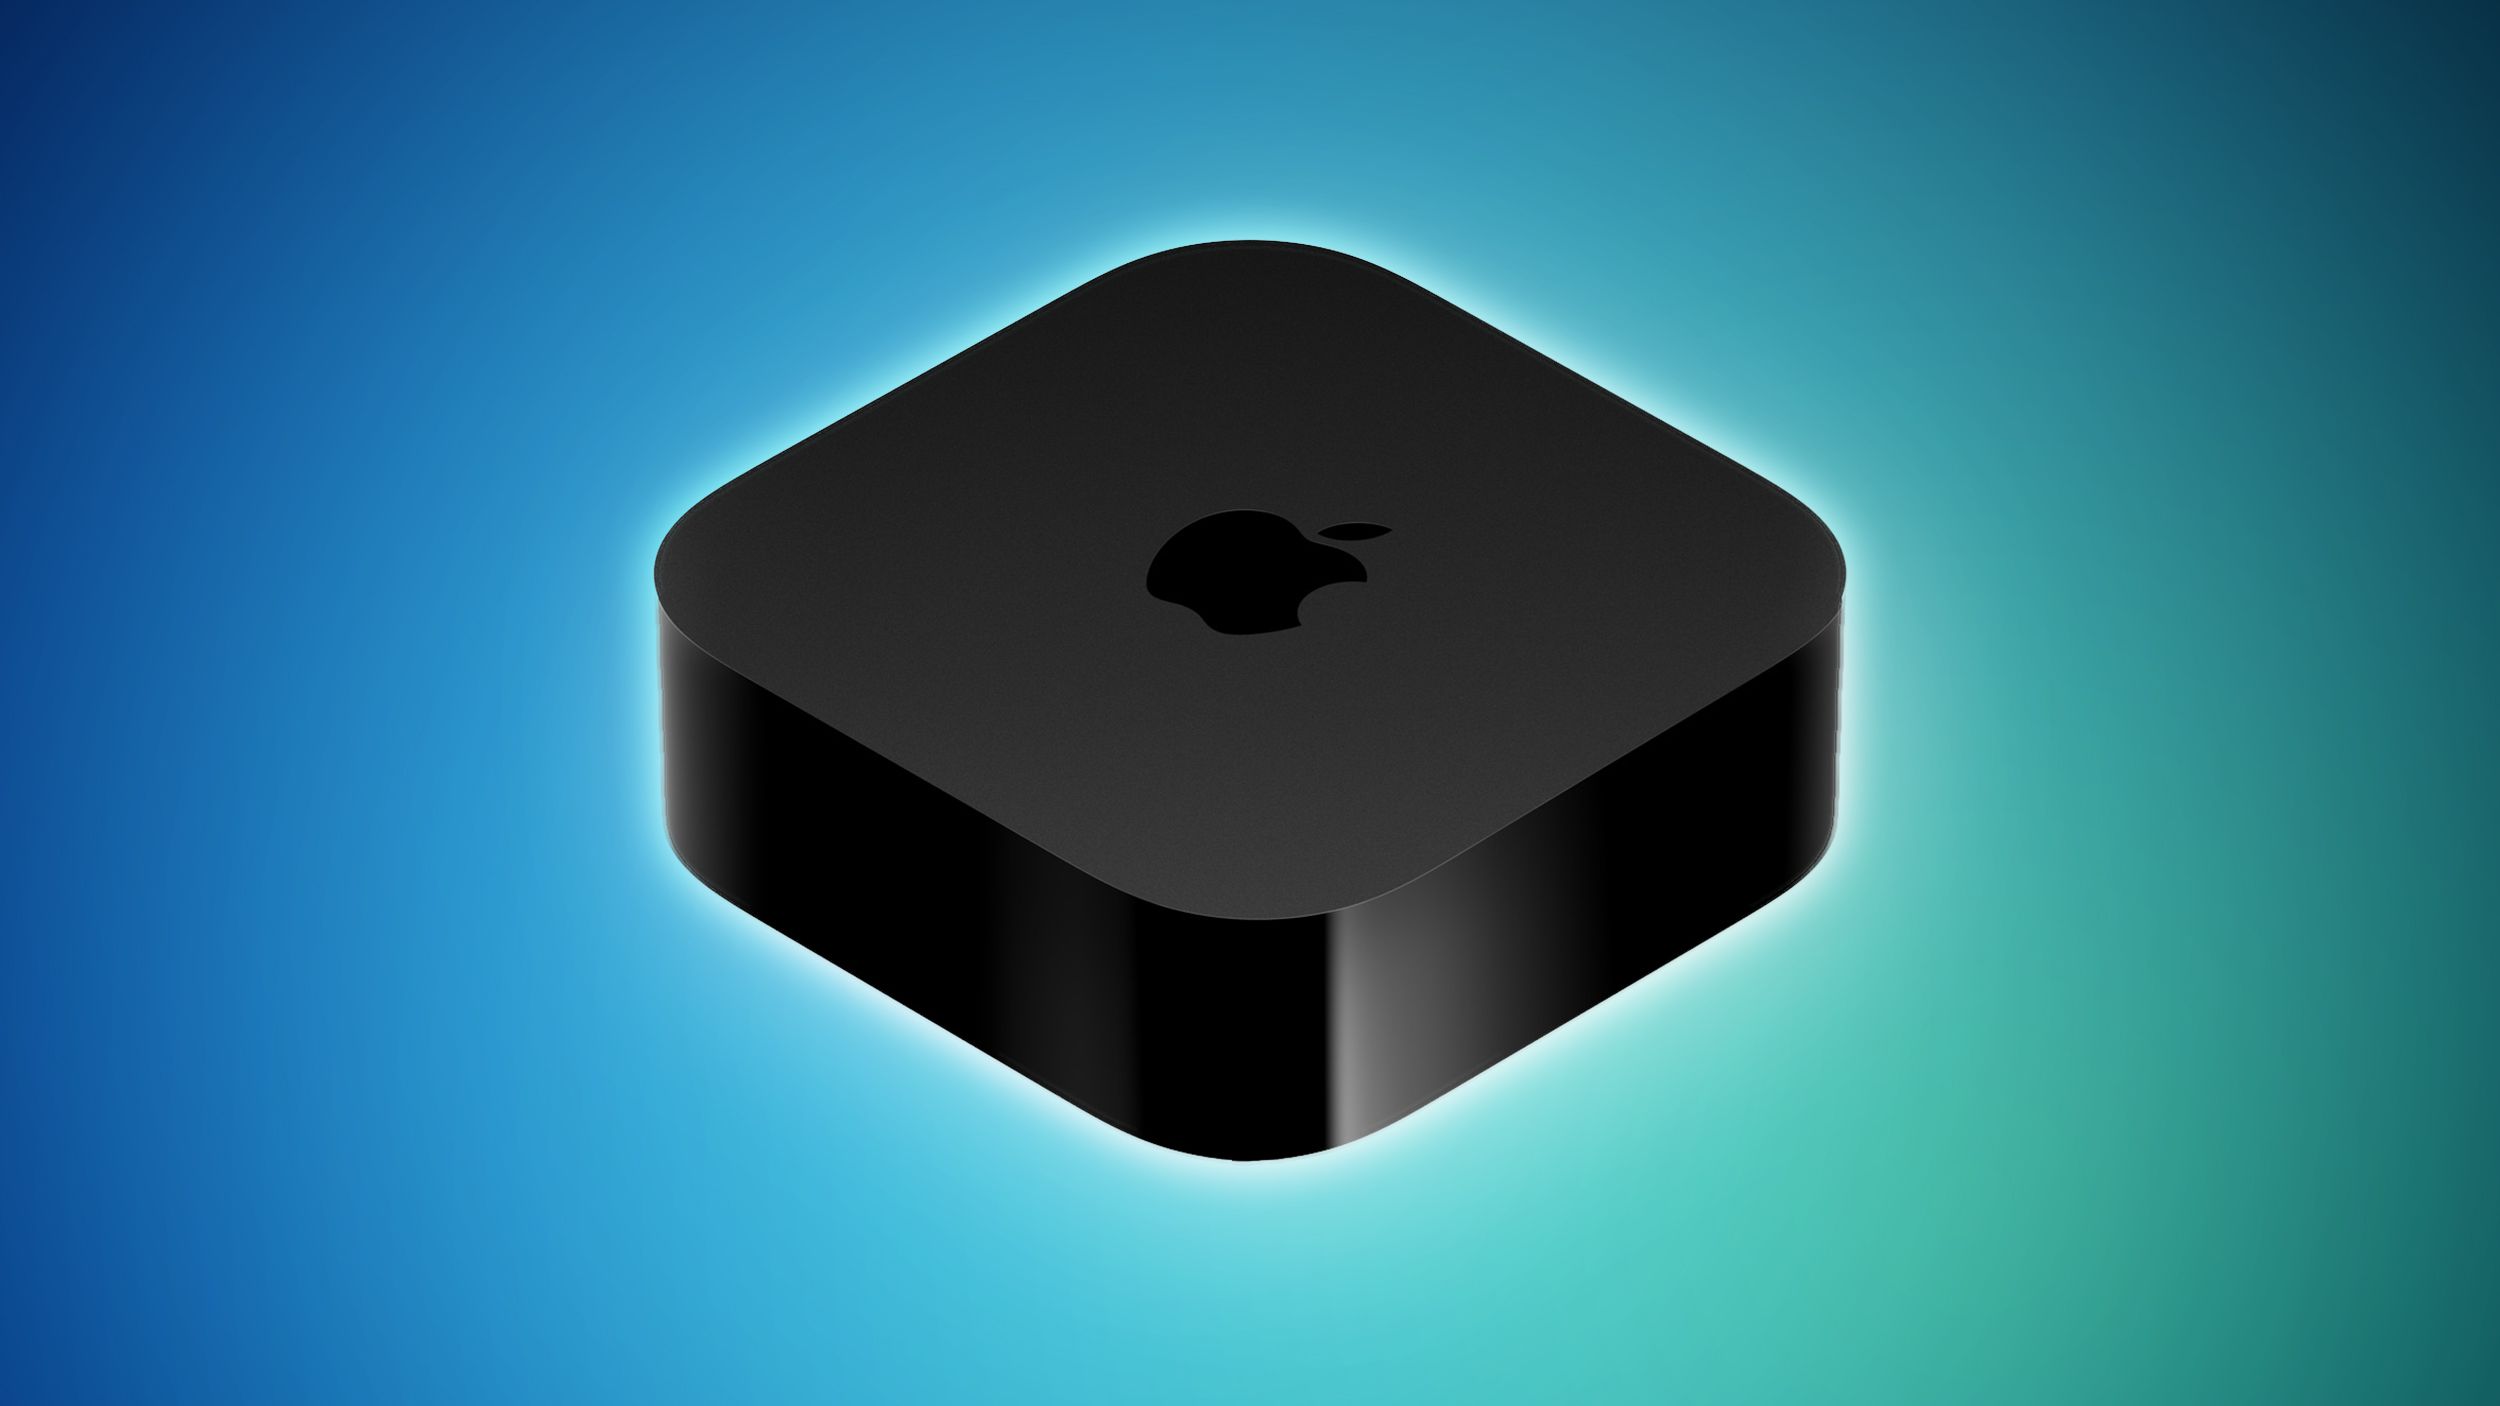 Apple TV: Just Updated with A15 Chip and Cheaper Price